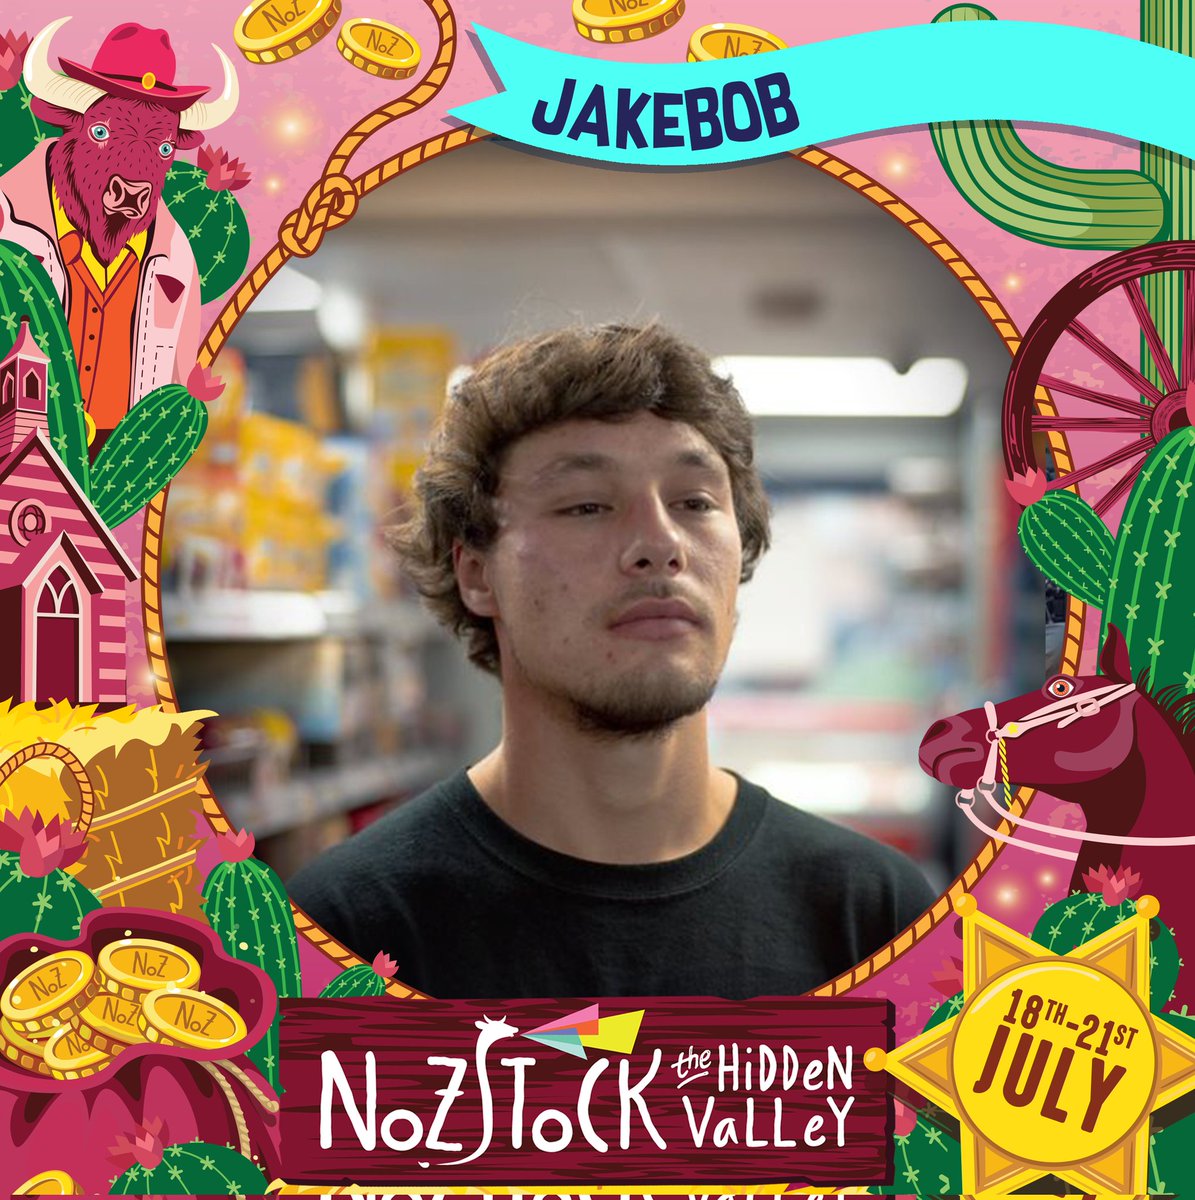 First festival booking ✅ Catch me spinning UKG at @Nozstock Saturday 20th July opening up the Bullpen stage 🐂 Give me a signal if you're rolling💨💨